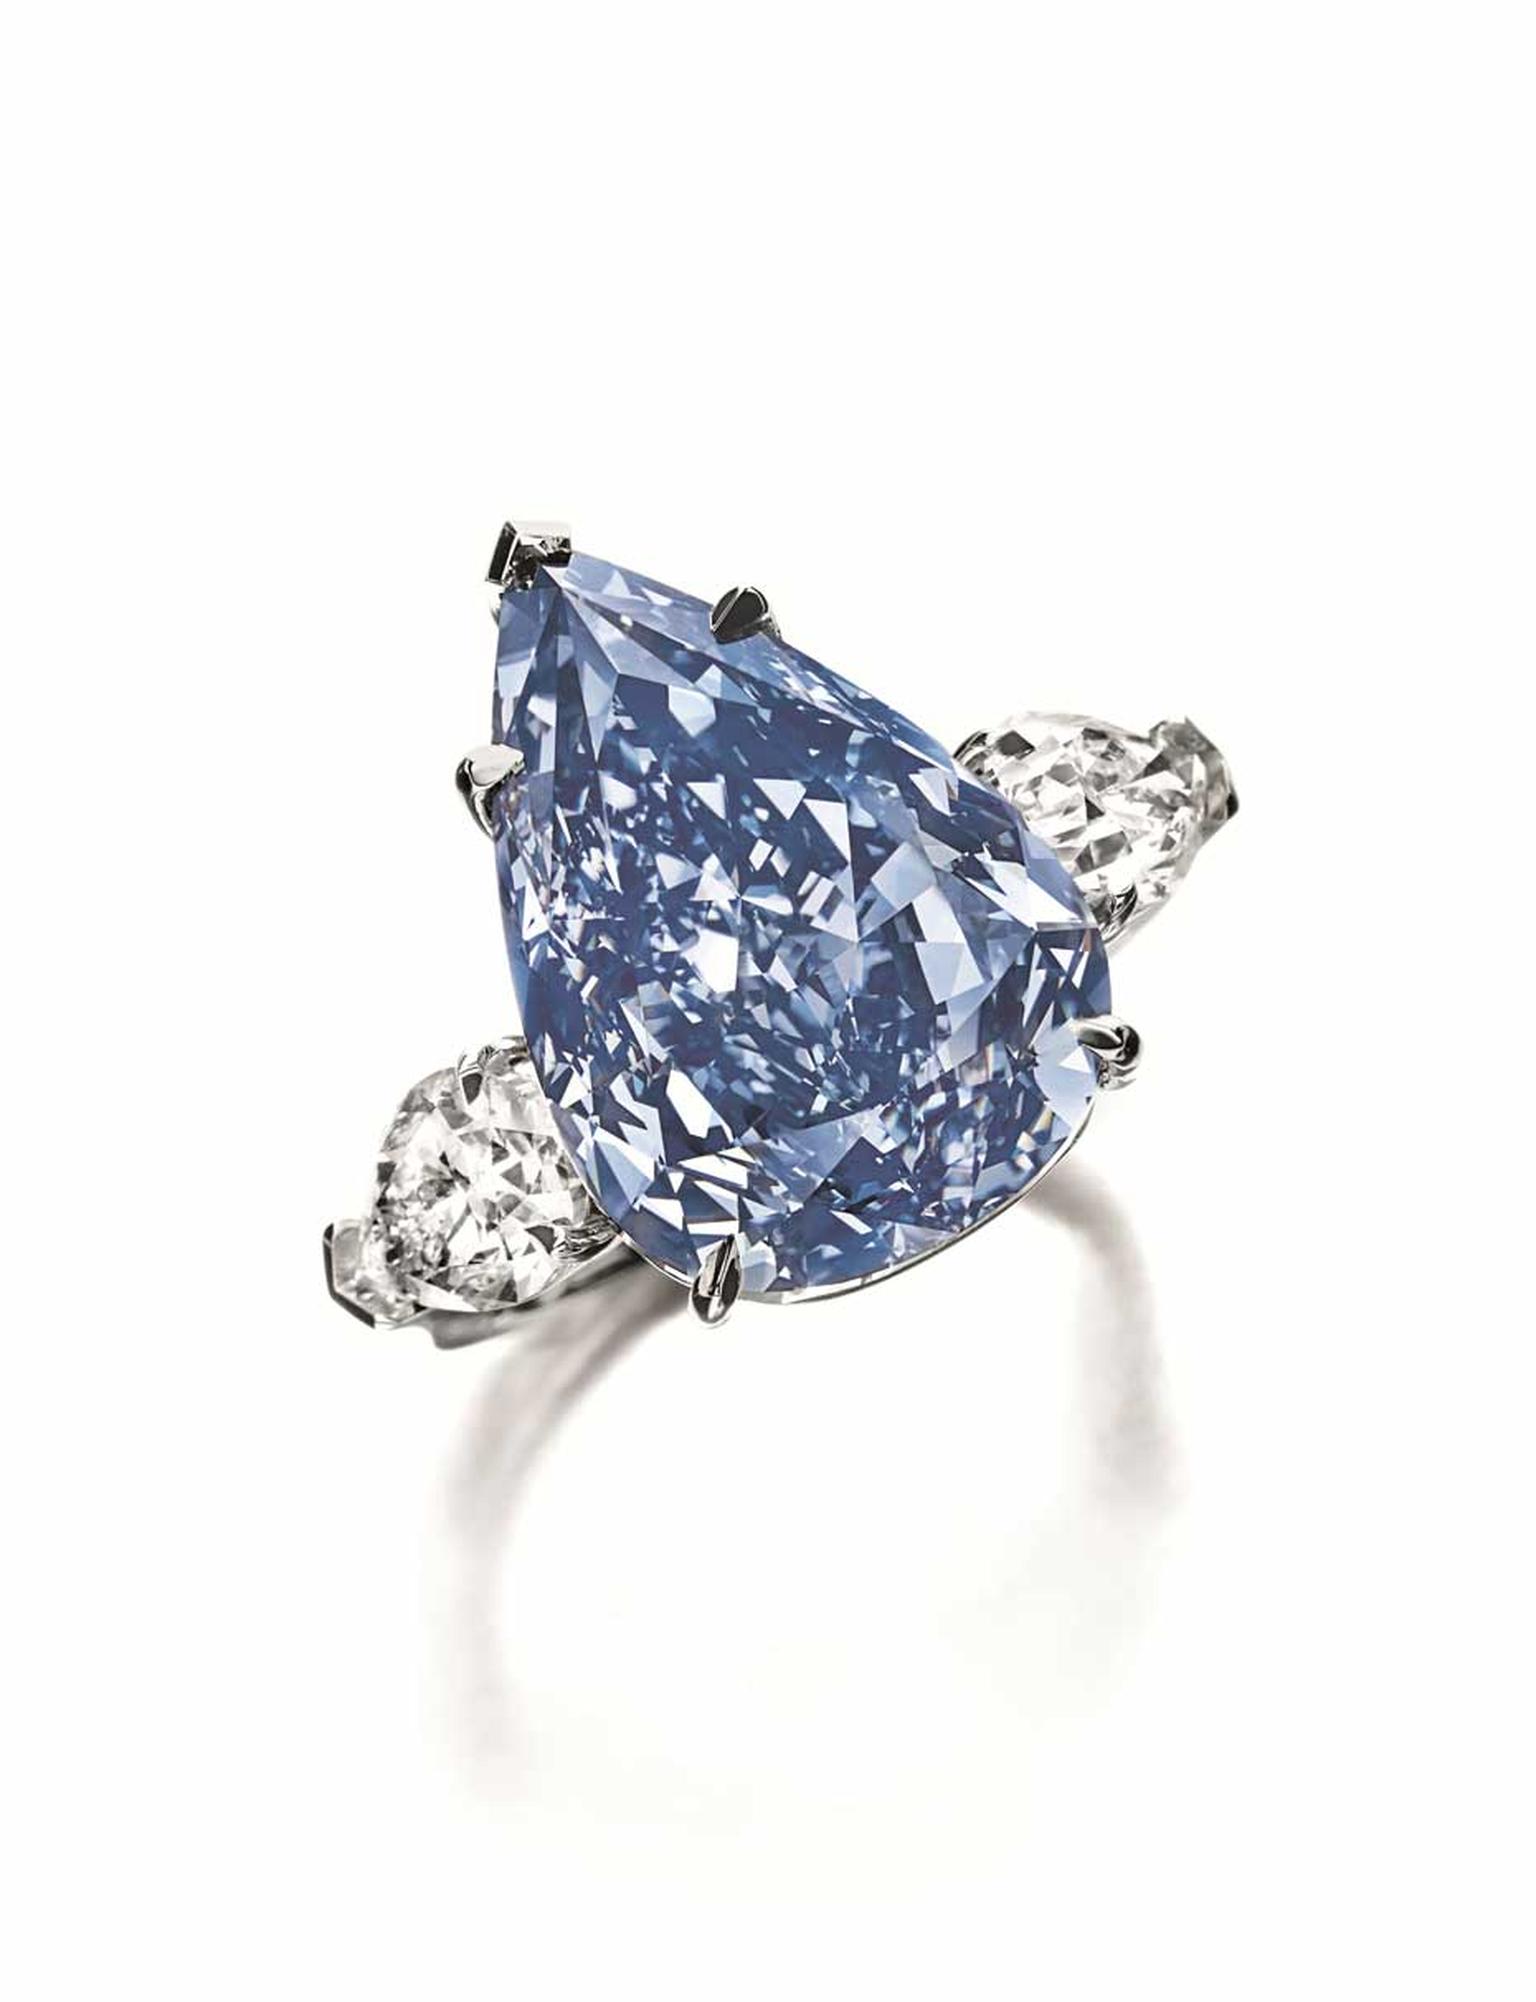 Weighing in at 13.22ct, the flawless, Fancy Vivid blue diamond fetched a staggering $1.79m per carat.